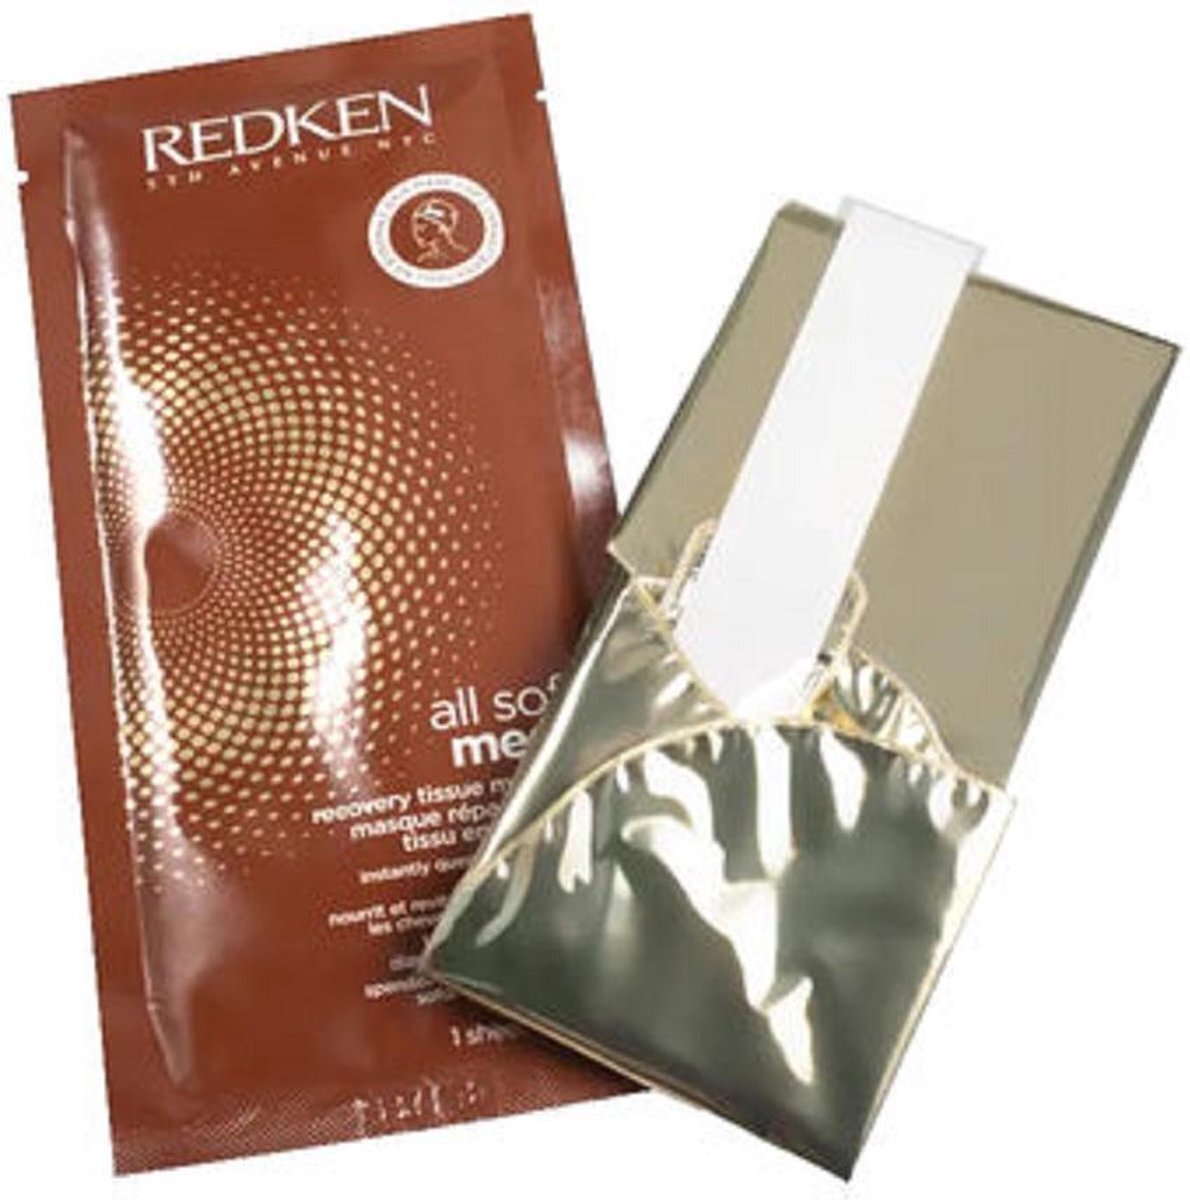 Redken All soft mega Recovery tissue mask cap 1pc